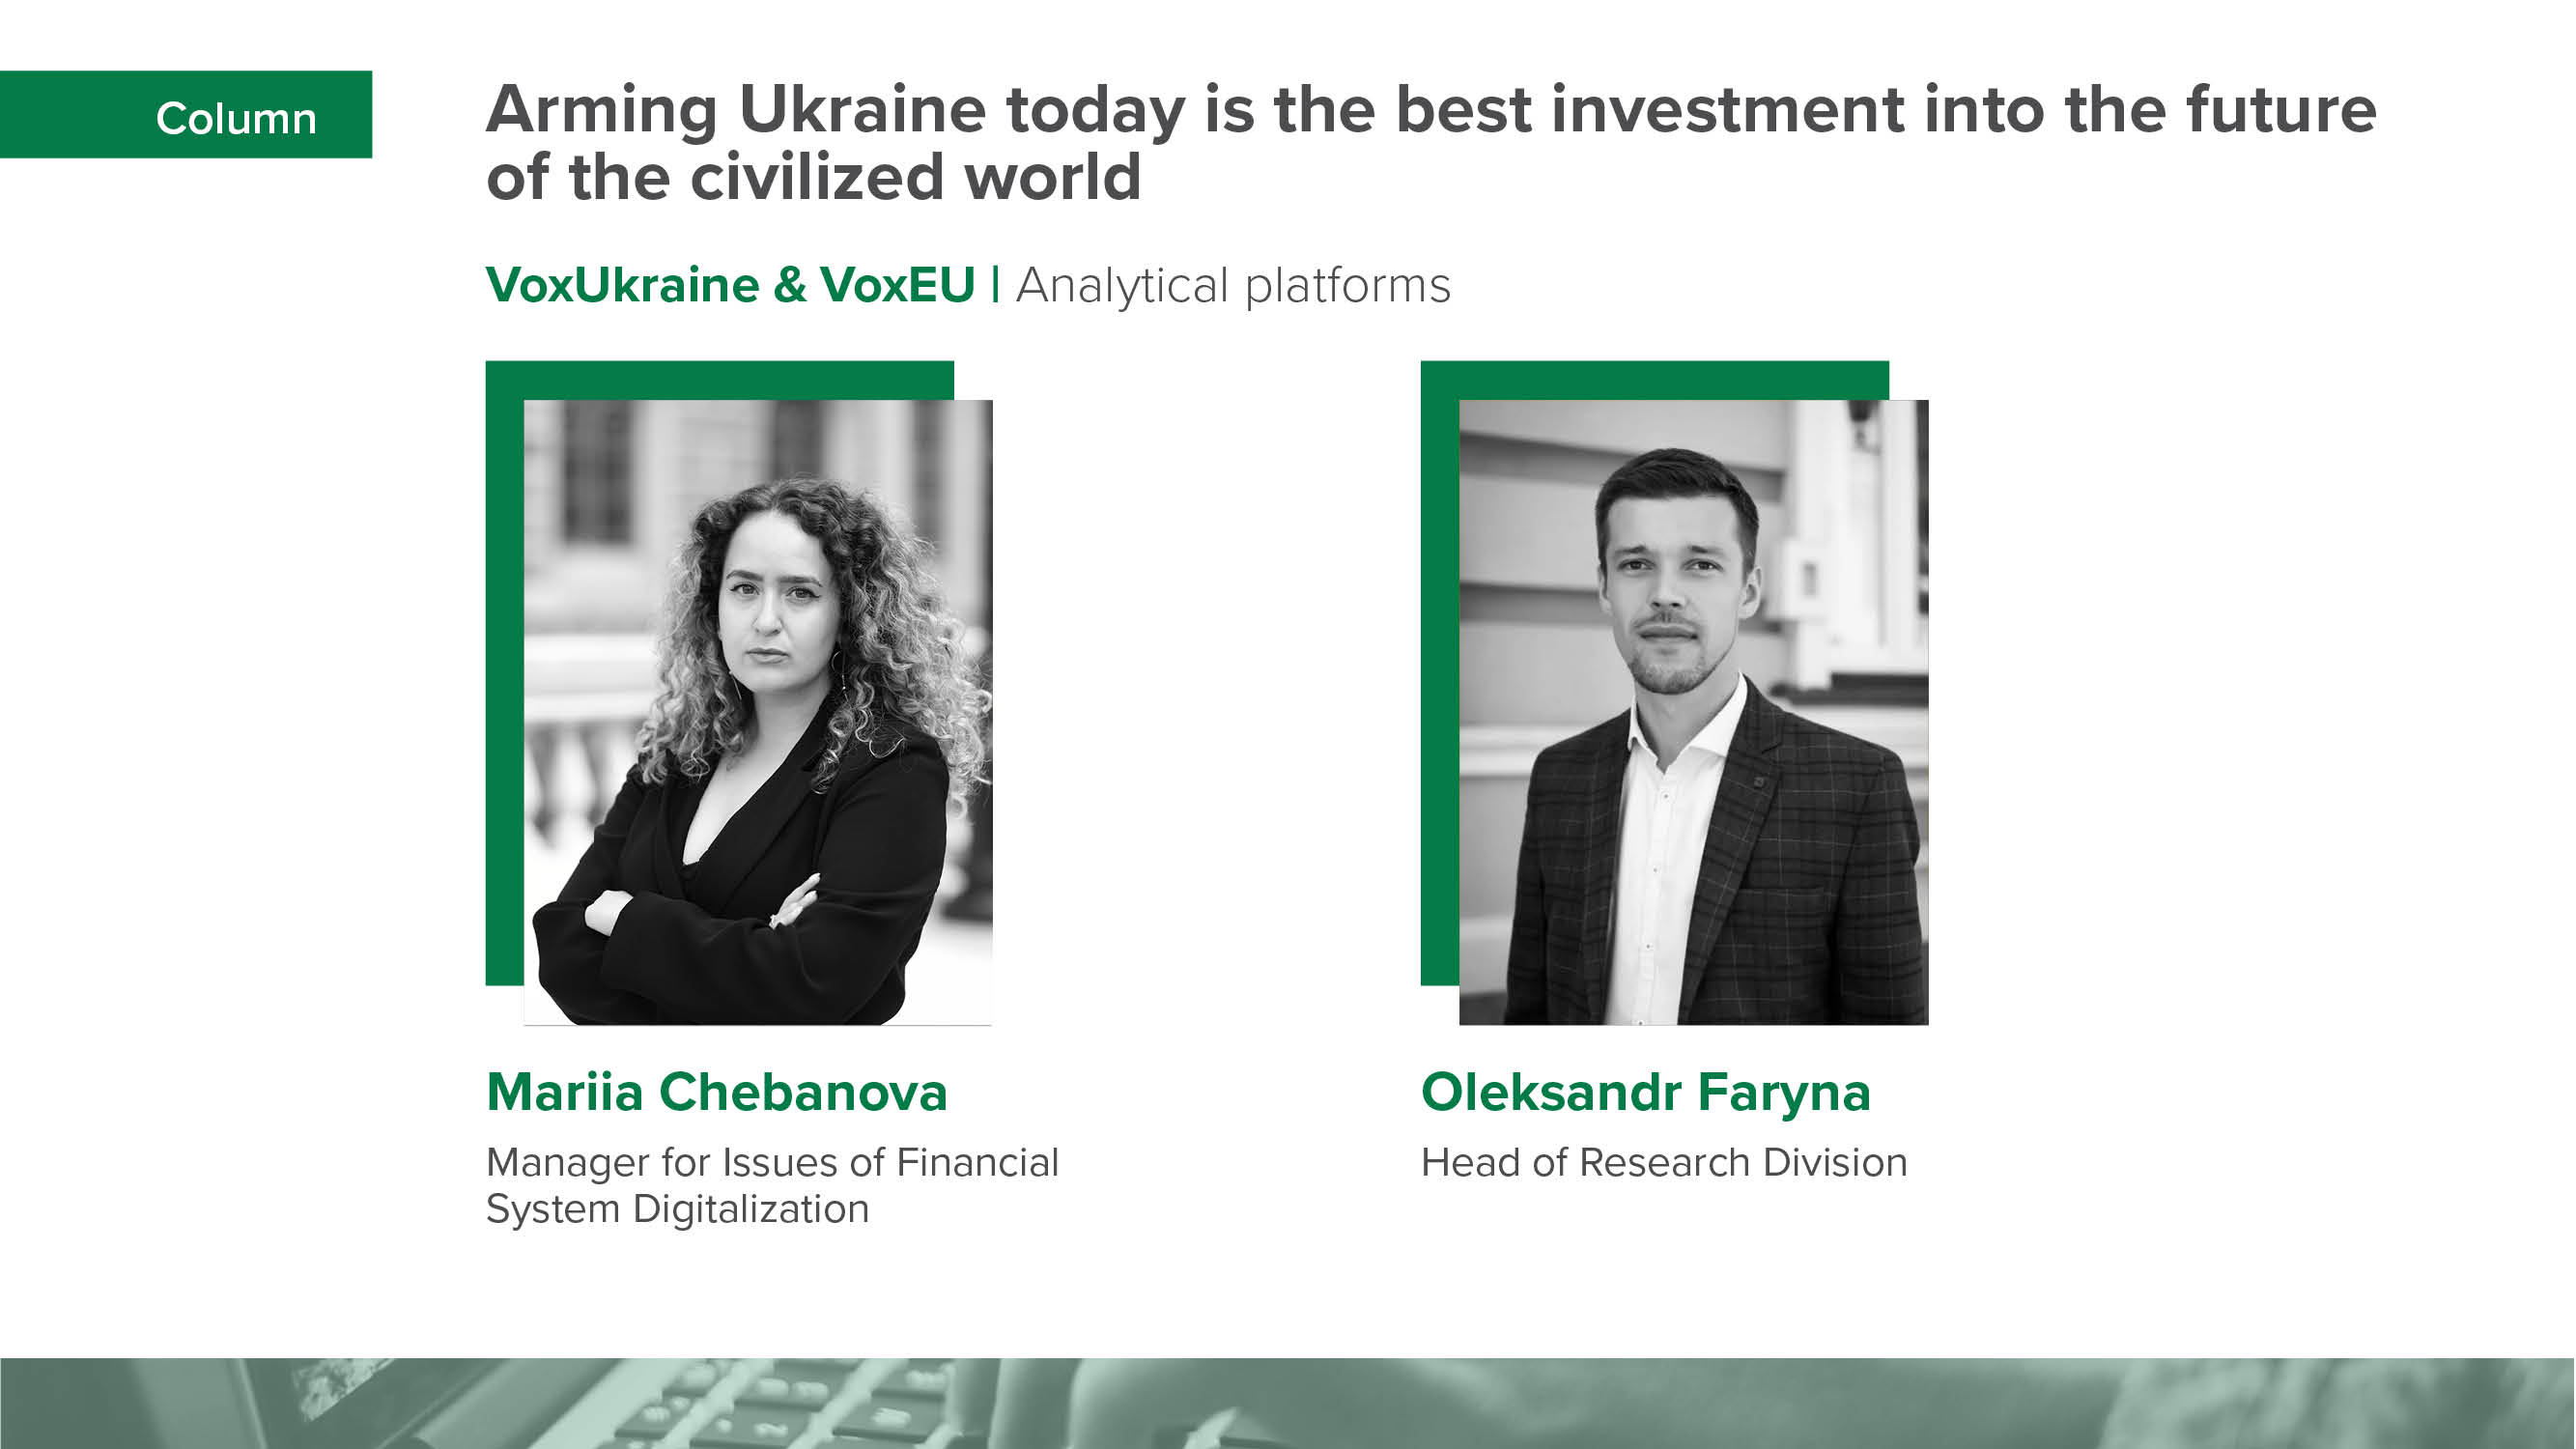 Columns by Mariia Chebanova and Oleksandr Faryna on VoxUkraine and VoxEU about the economic impact on partner countries from providing military support to Ukraine